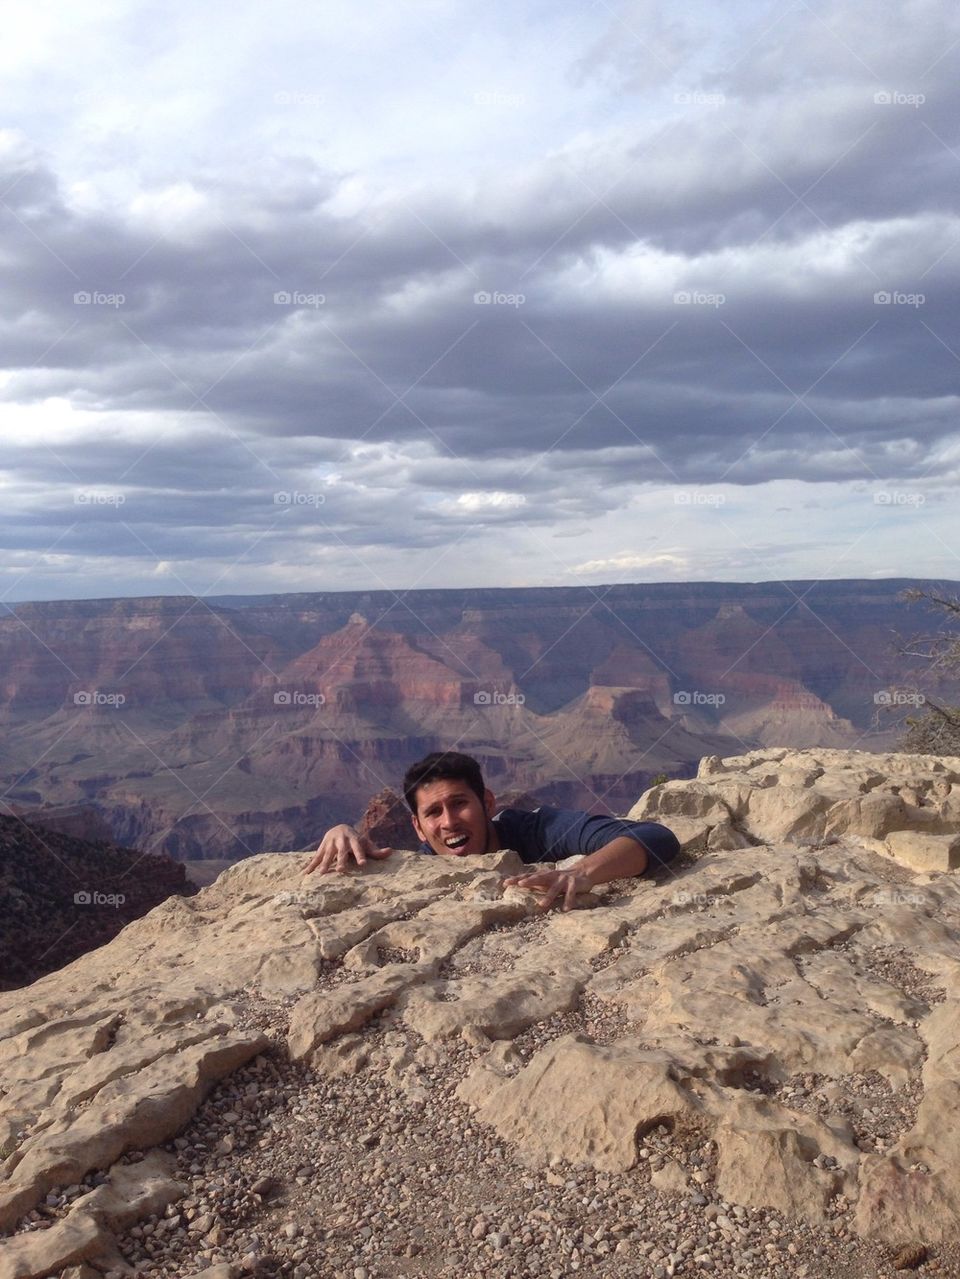 Hiking/Falling into the Grand Canyon 